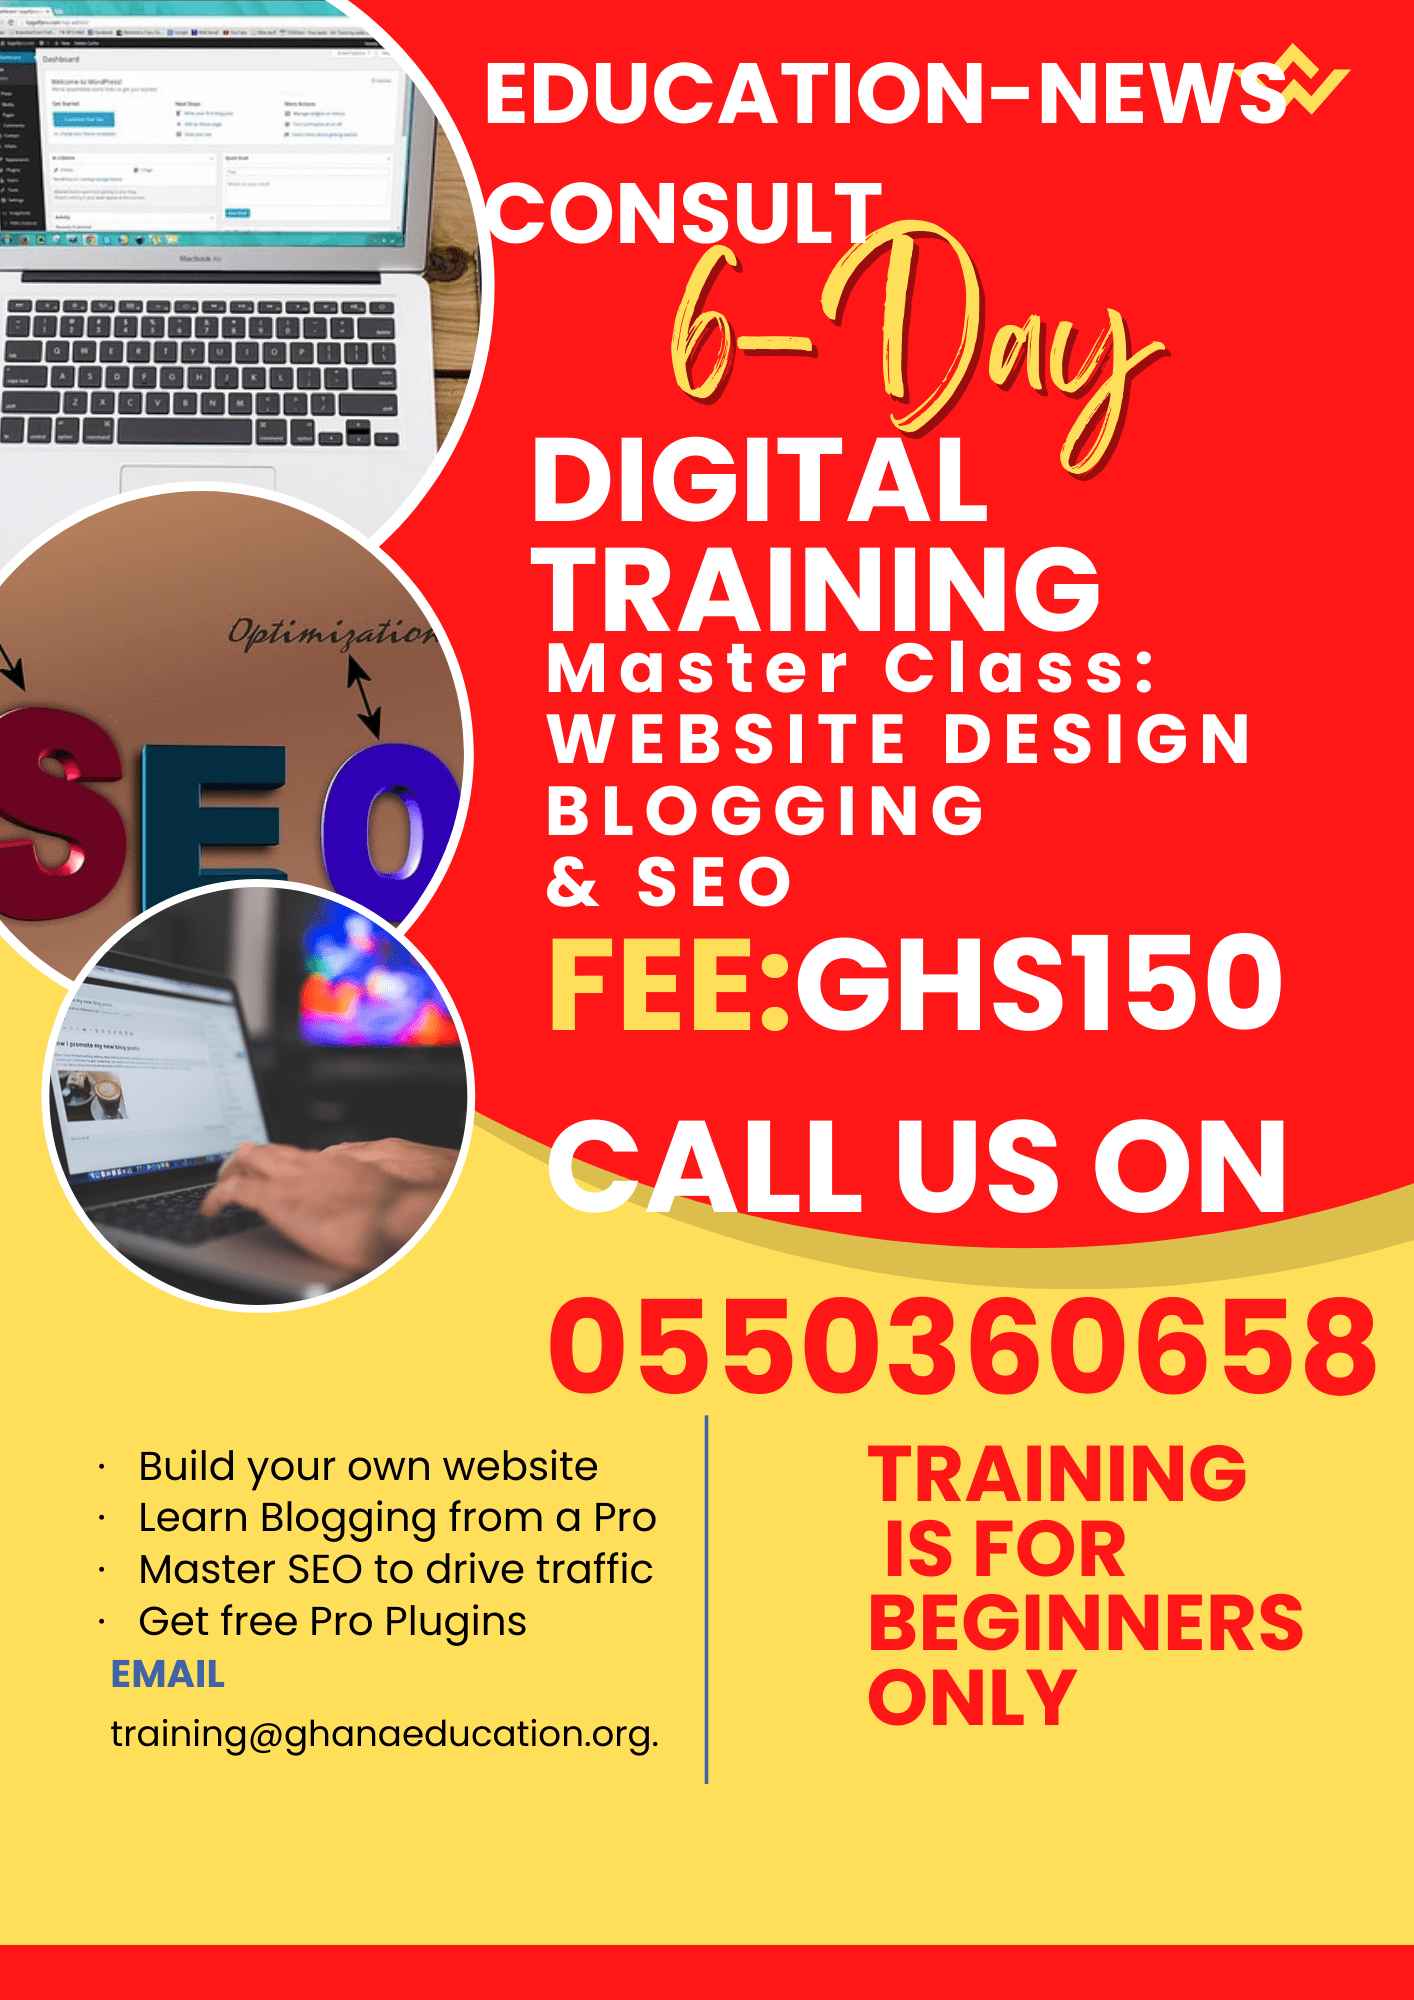 Join the Special Christmas Online Website, SEO, and Blogging Training for Beginners. In this training to be organized on WhatsApp and Zoom, participants will learn the practical aspects of building websites, learning SEO basics, and mastering the act of writing quality content that drives traffic. 